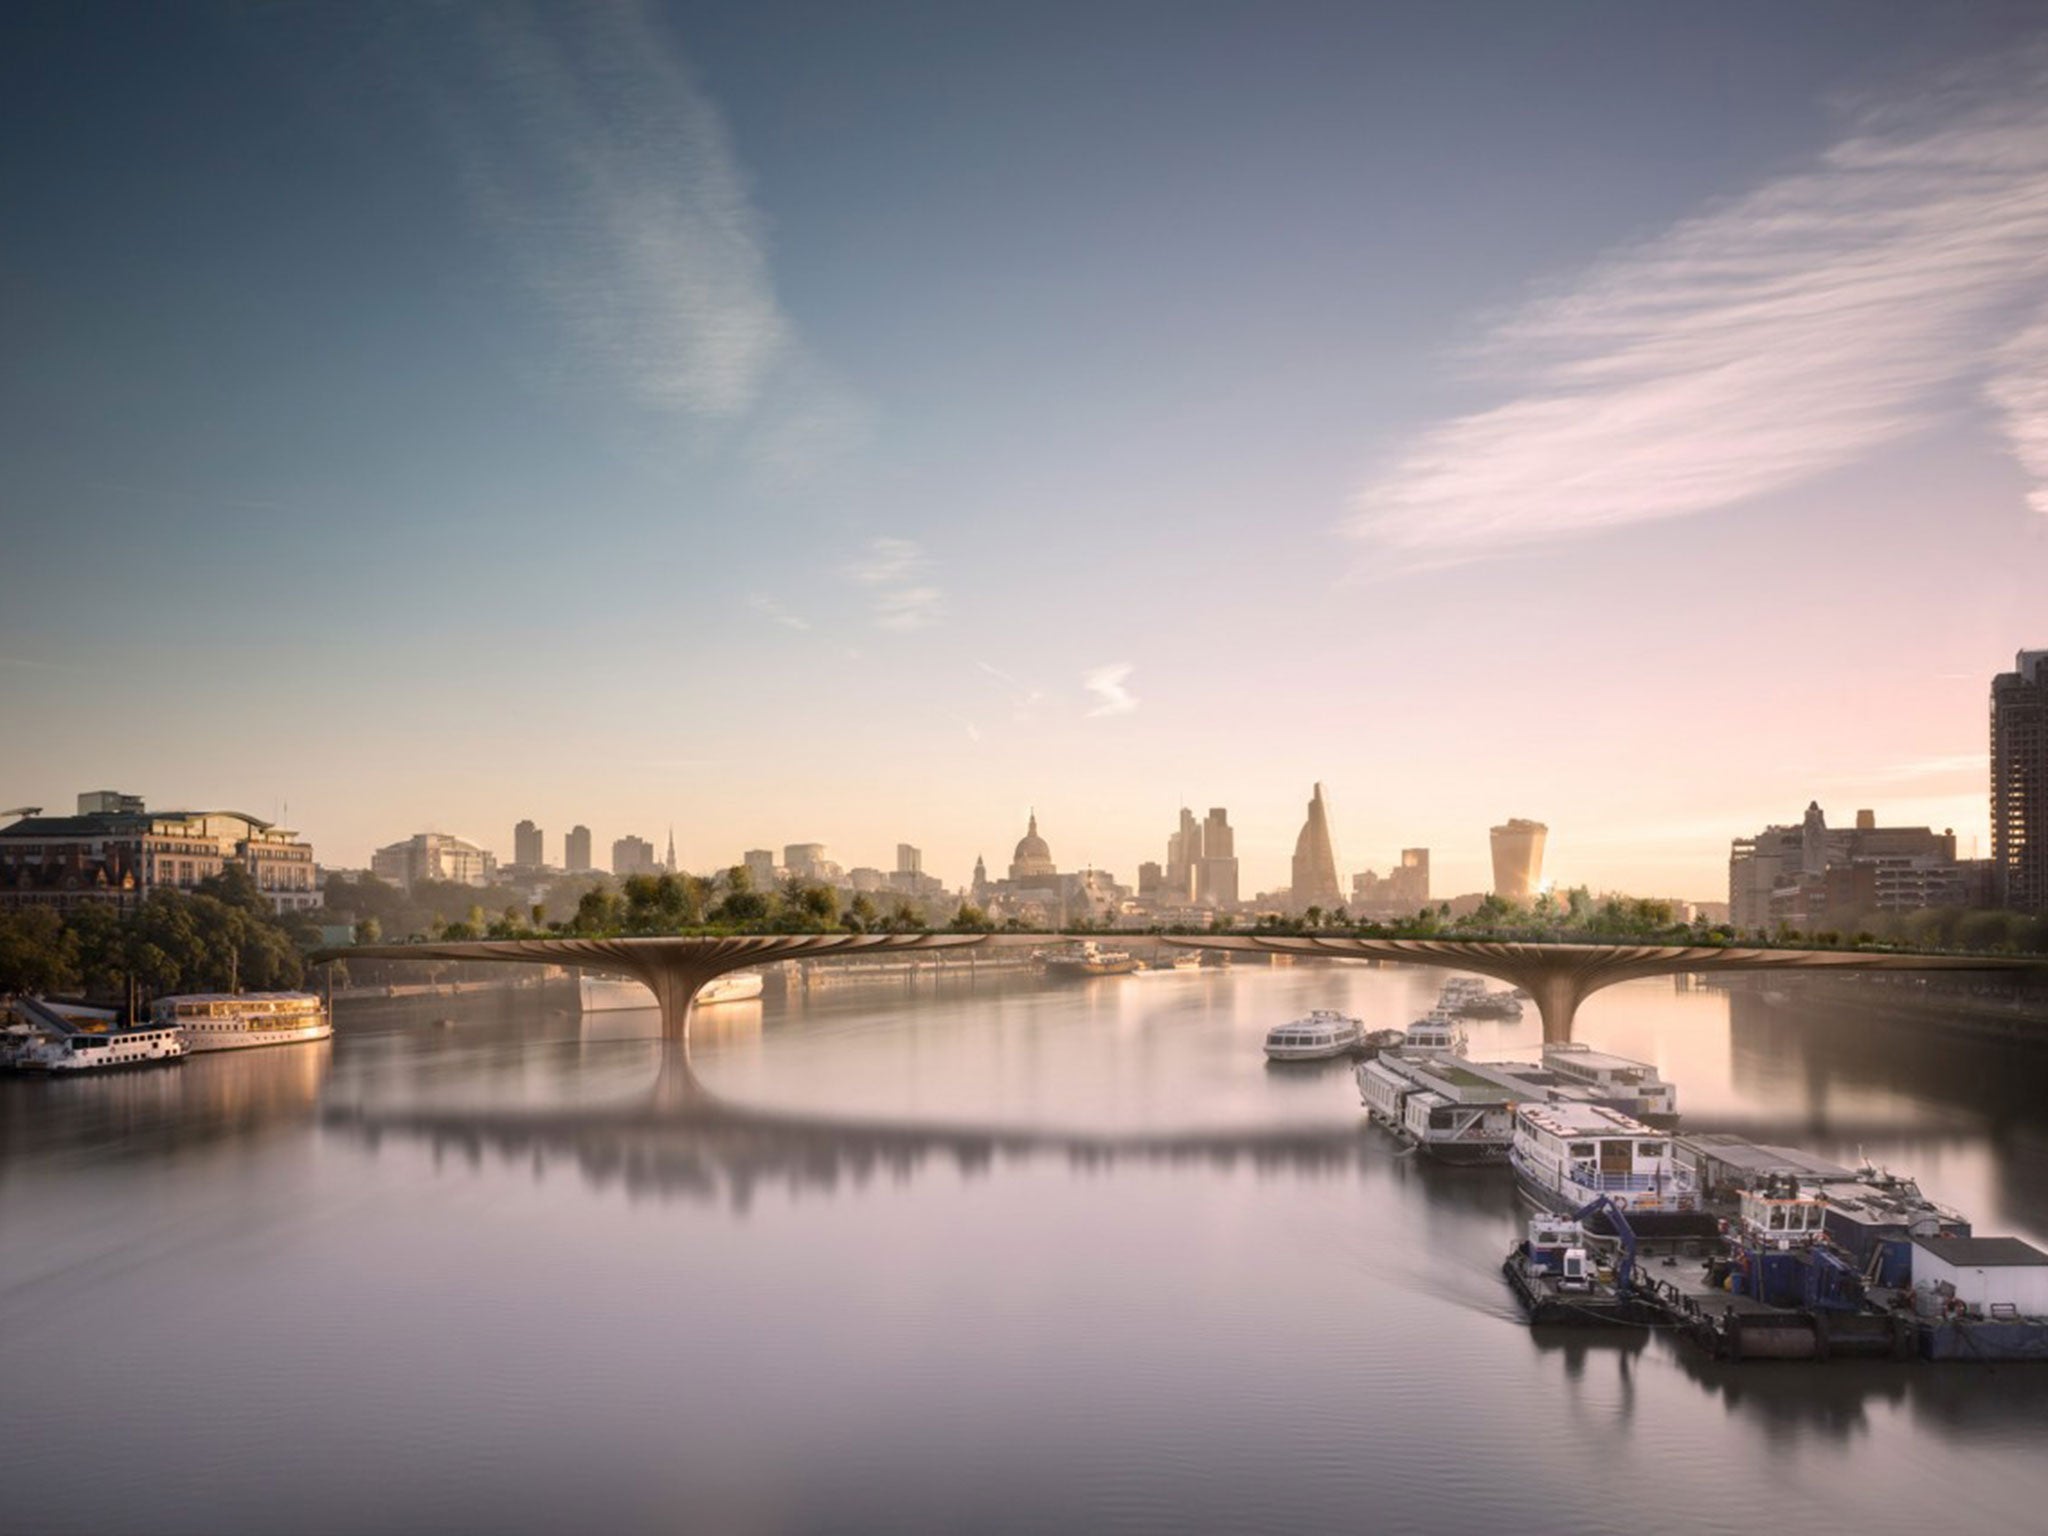 A mock-up of the proposed Thames Garden Bridge